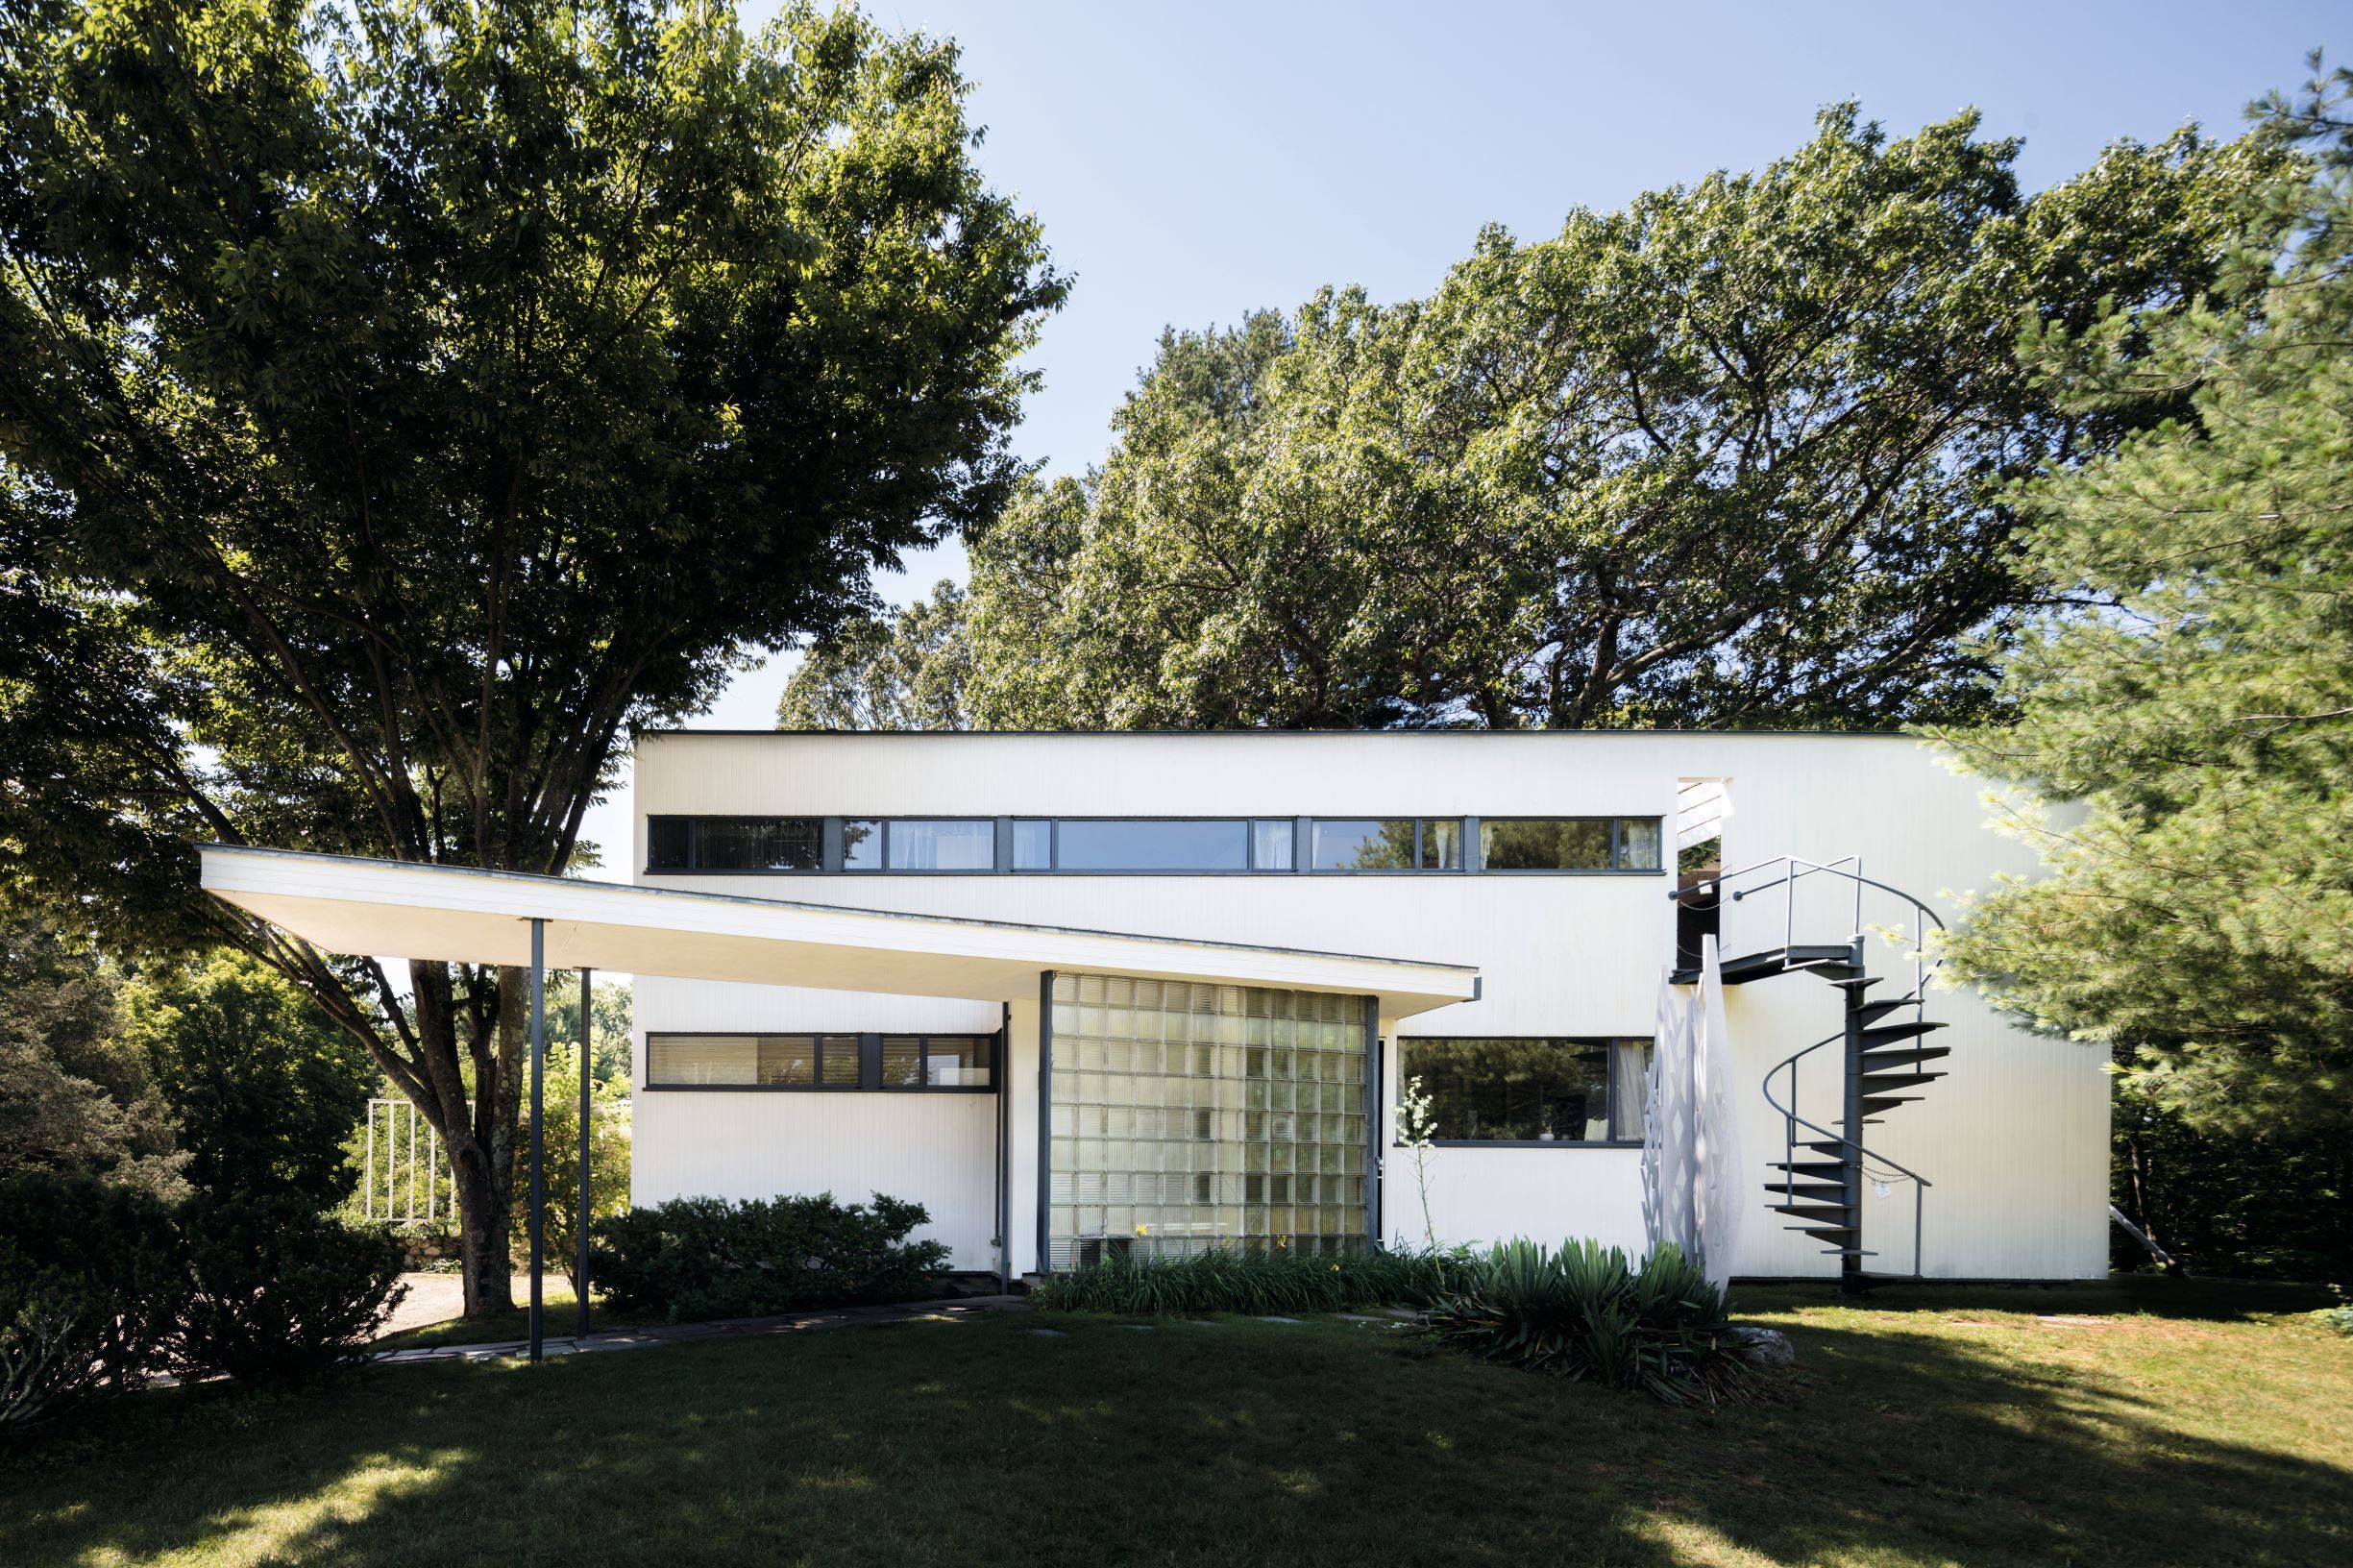 The Gropius House, as featured in Mid-Century Modern Architecture Travel Guide: East Coast USA